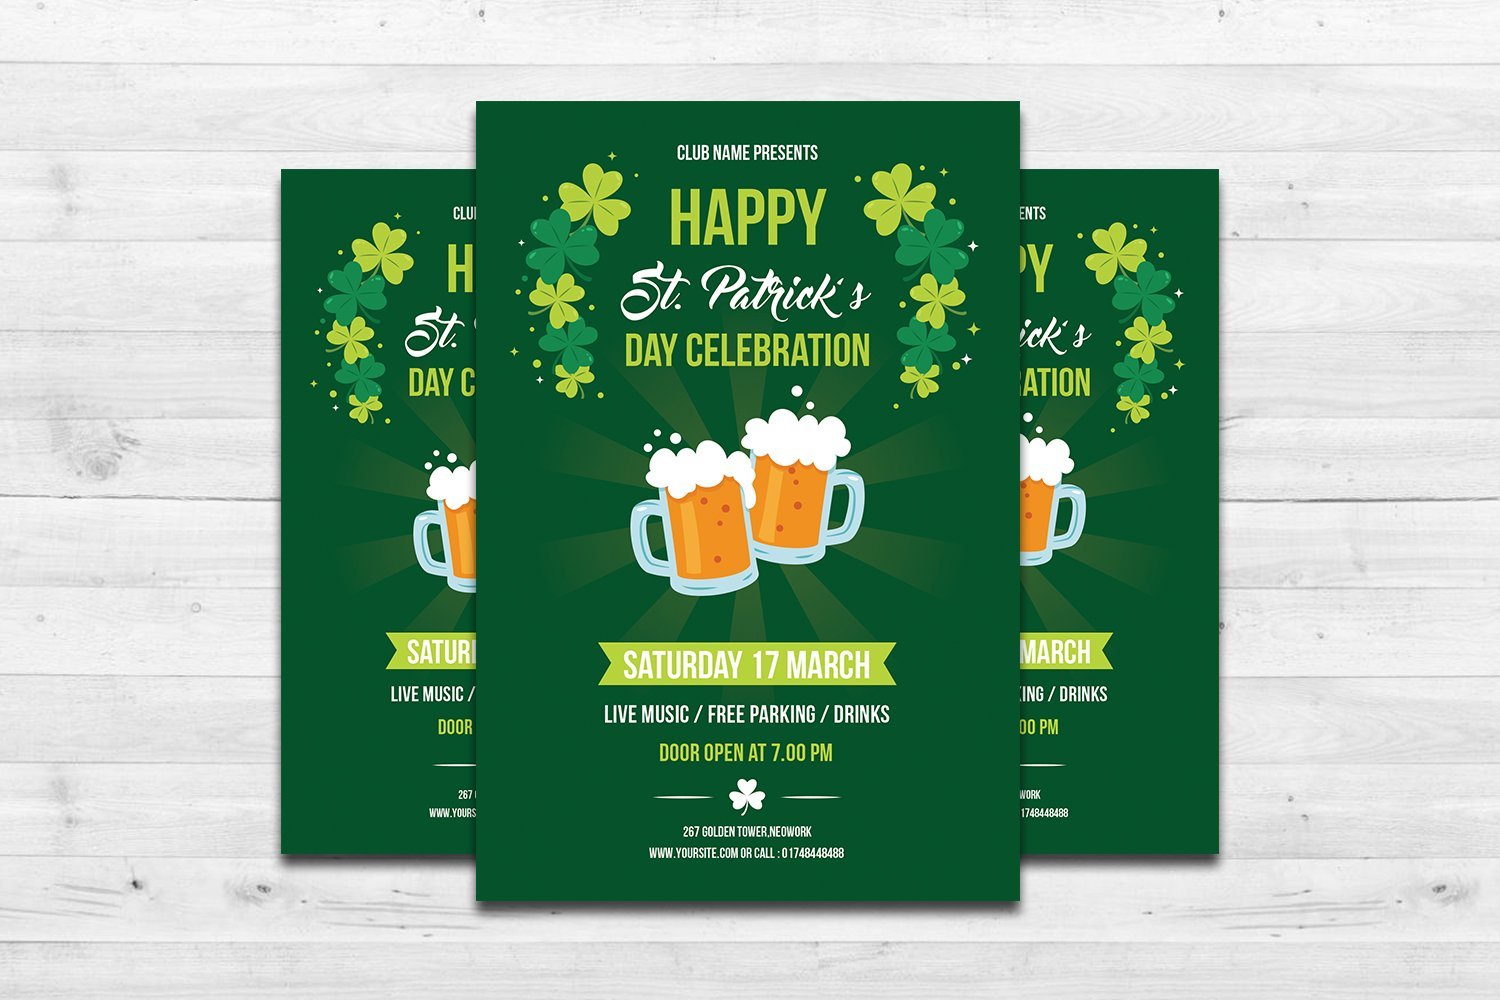 Template #383646 Patrick Day Webdesign Template - Logo template Preview